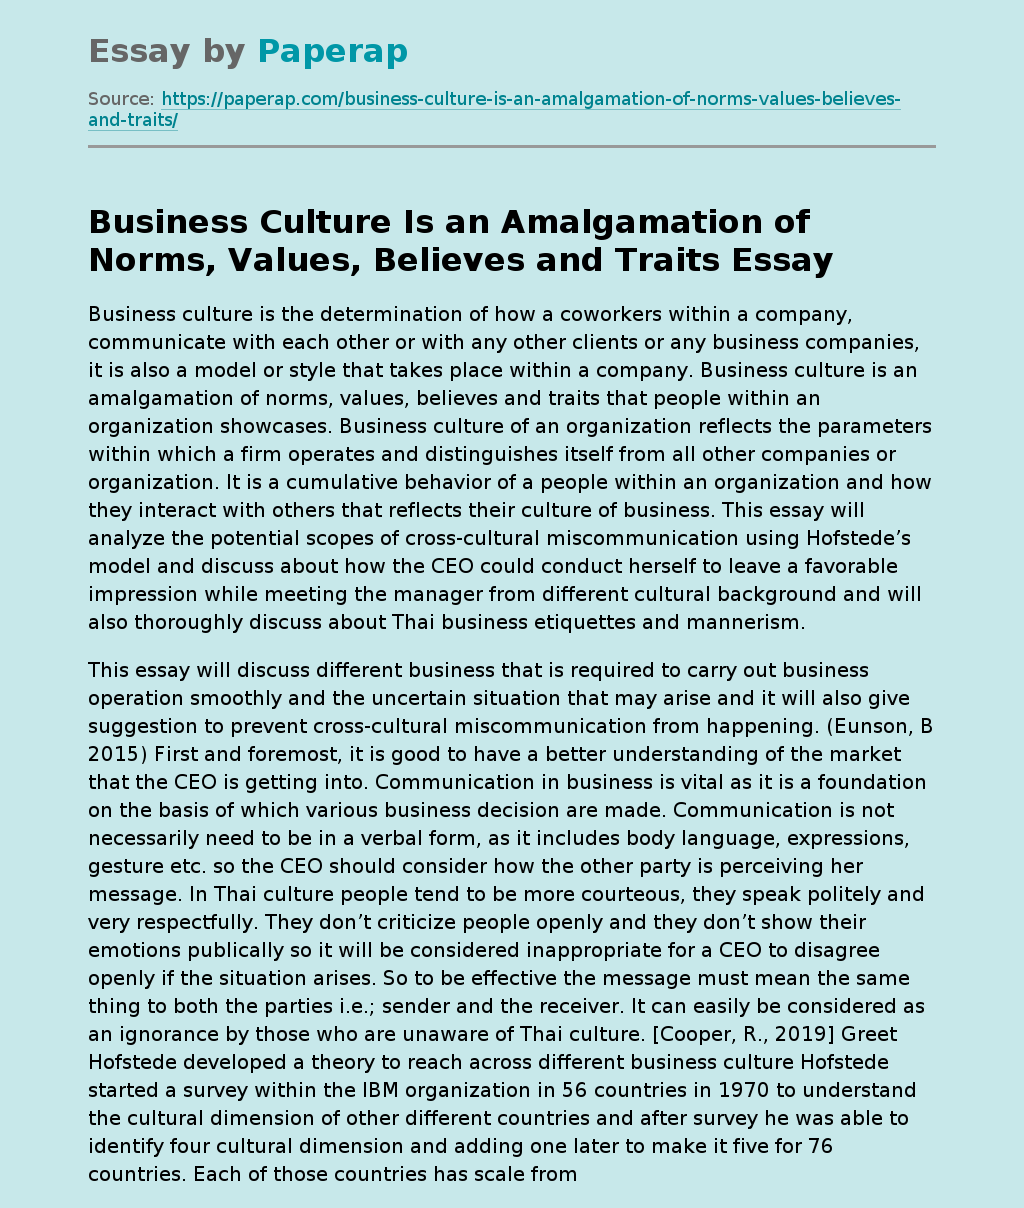 Business Culture Is an Amalgamation of Norms, Values, Believes and Traits